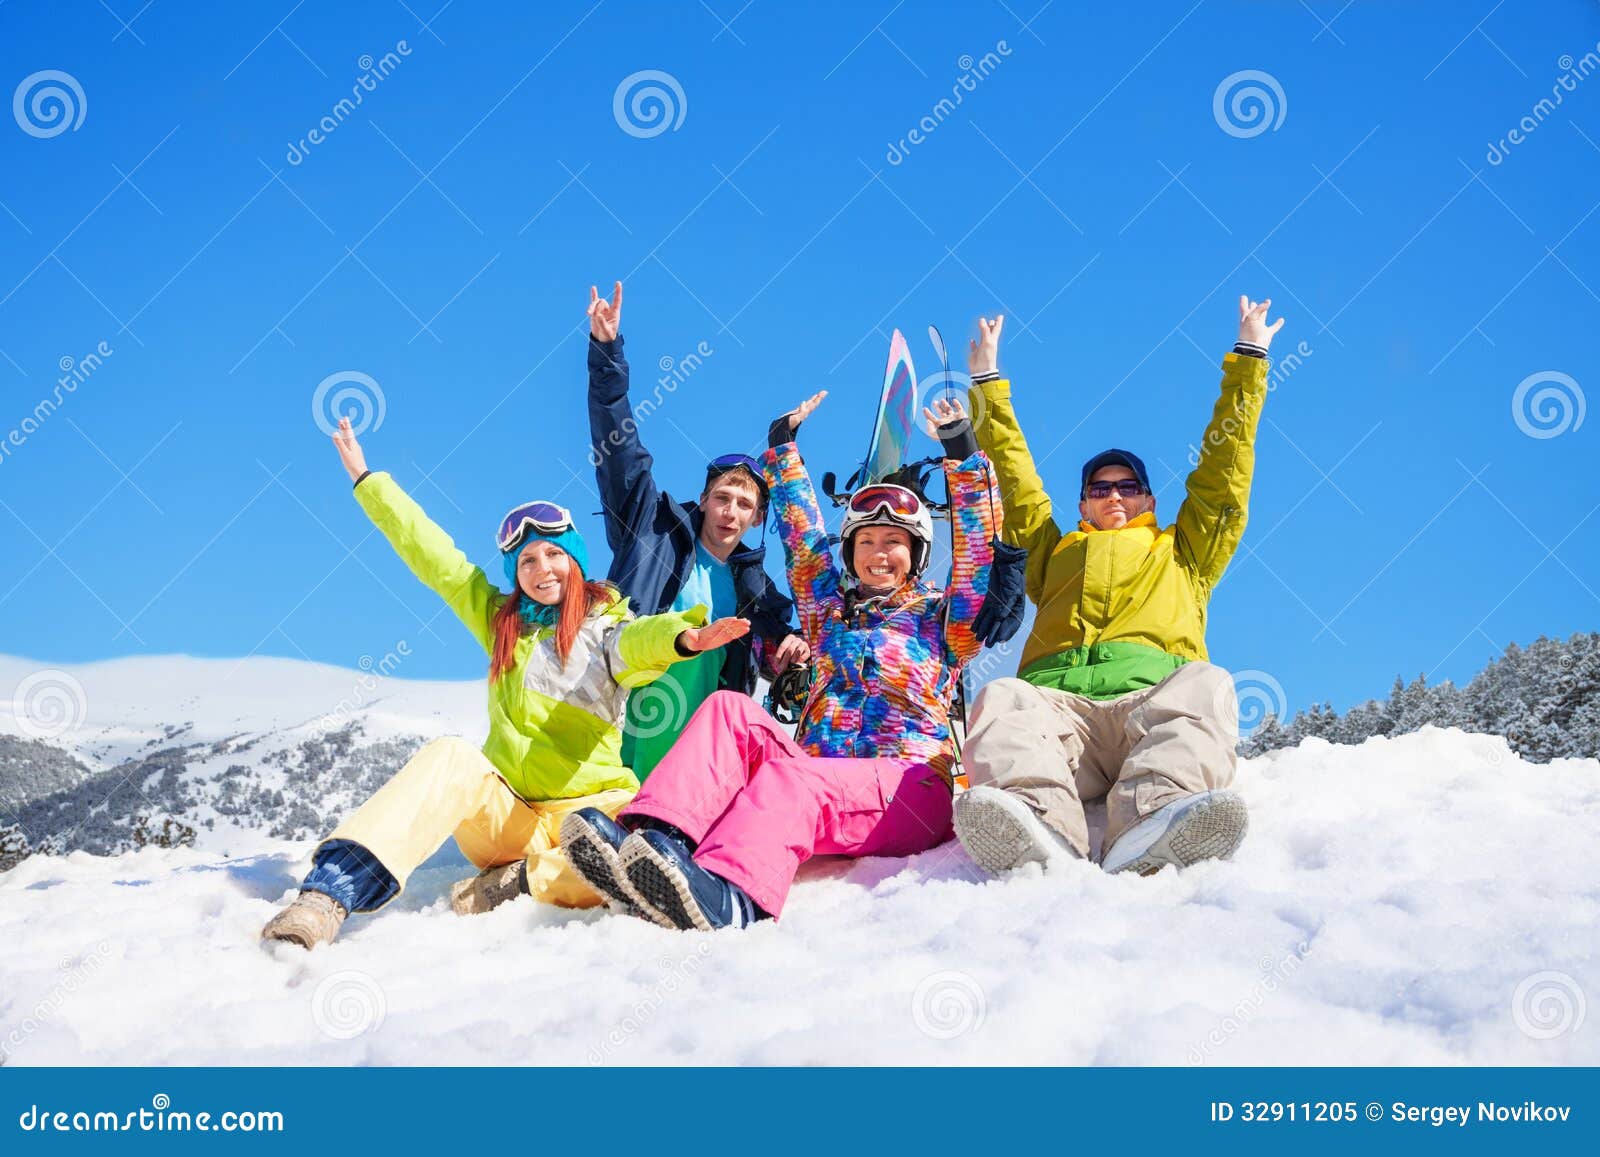 Group of four snowboarders stock image. Image of girl - 32911205